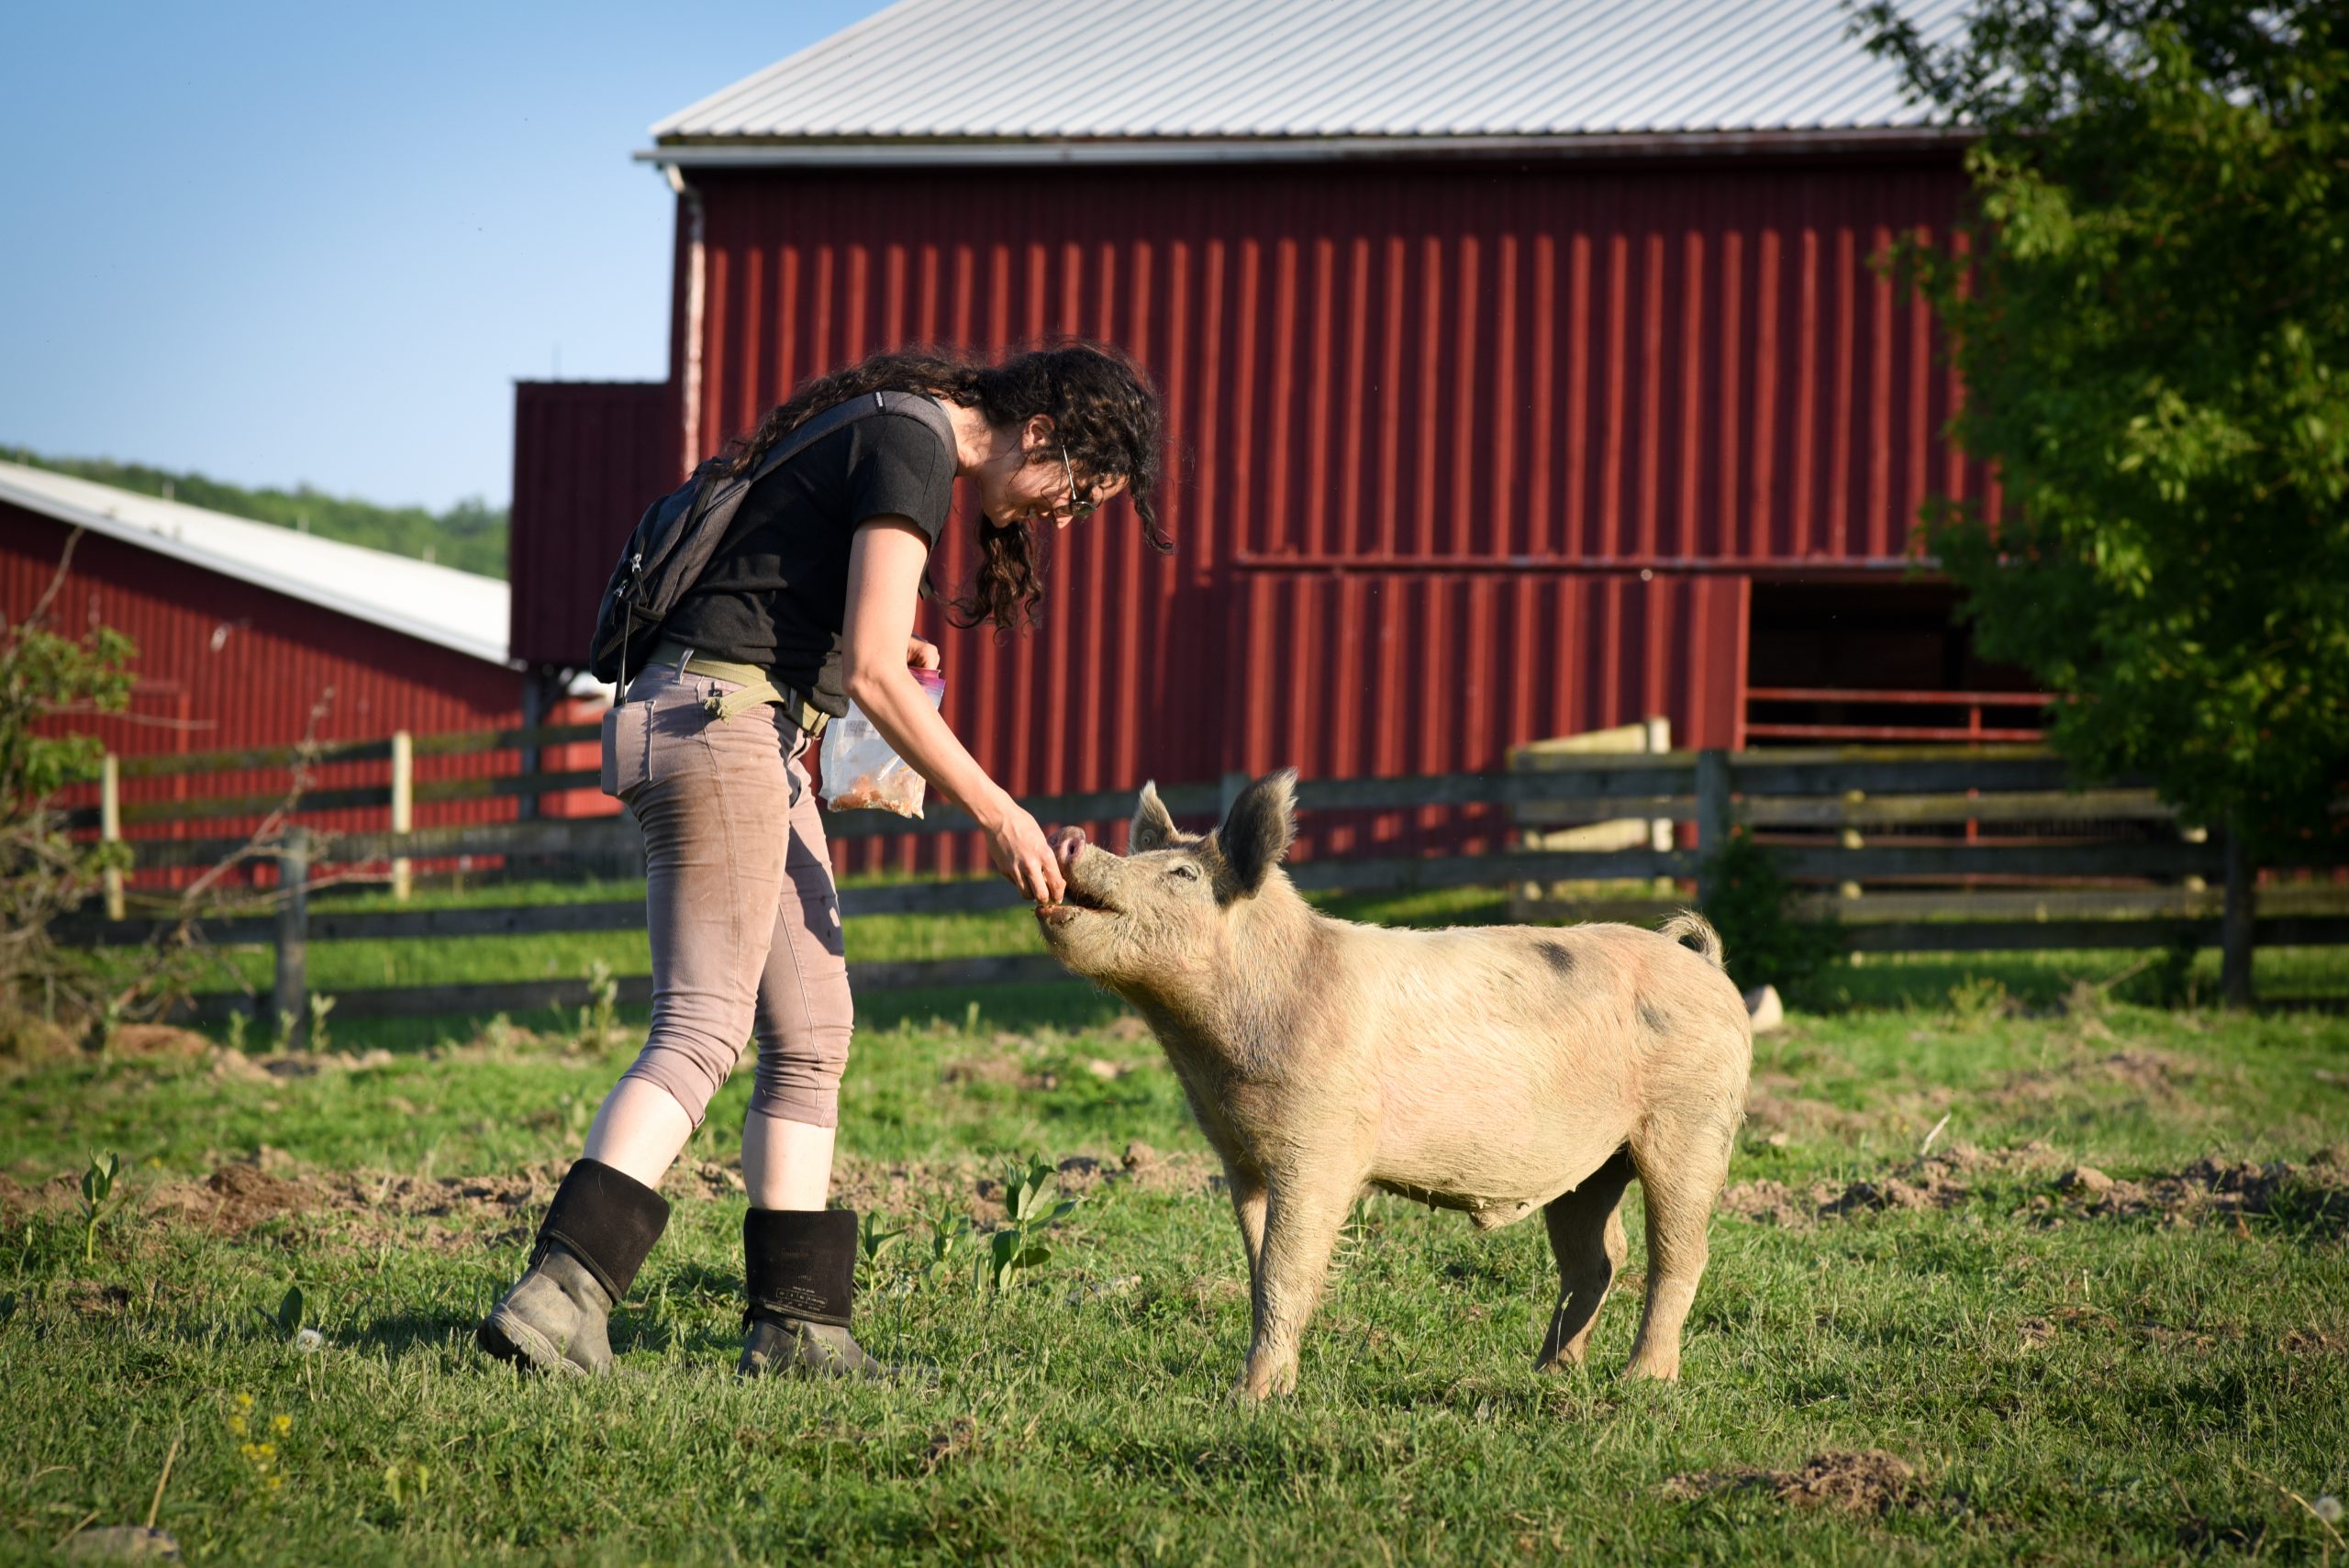 Vertical explainer photo 1 - Caregiver giving a snack to a pig at Farm Sanctuary.